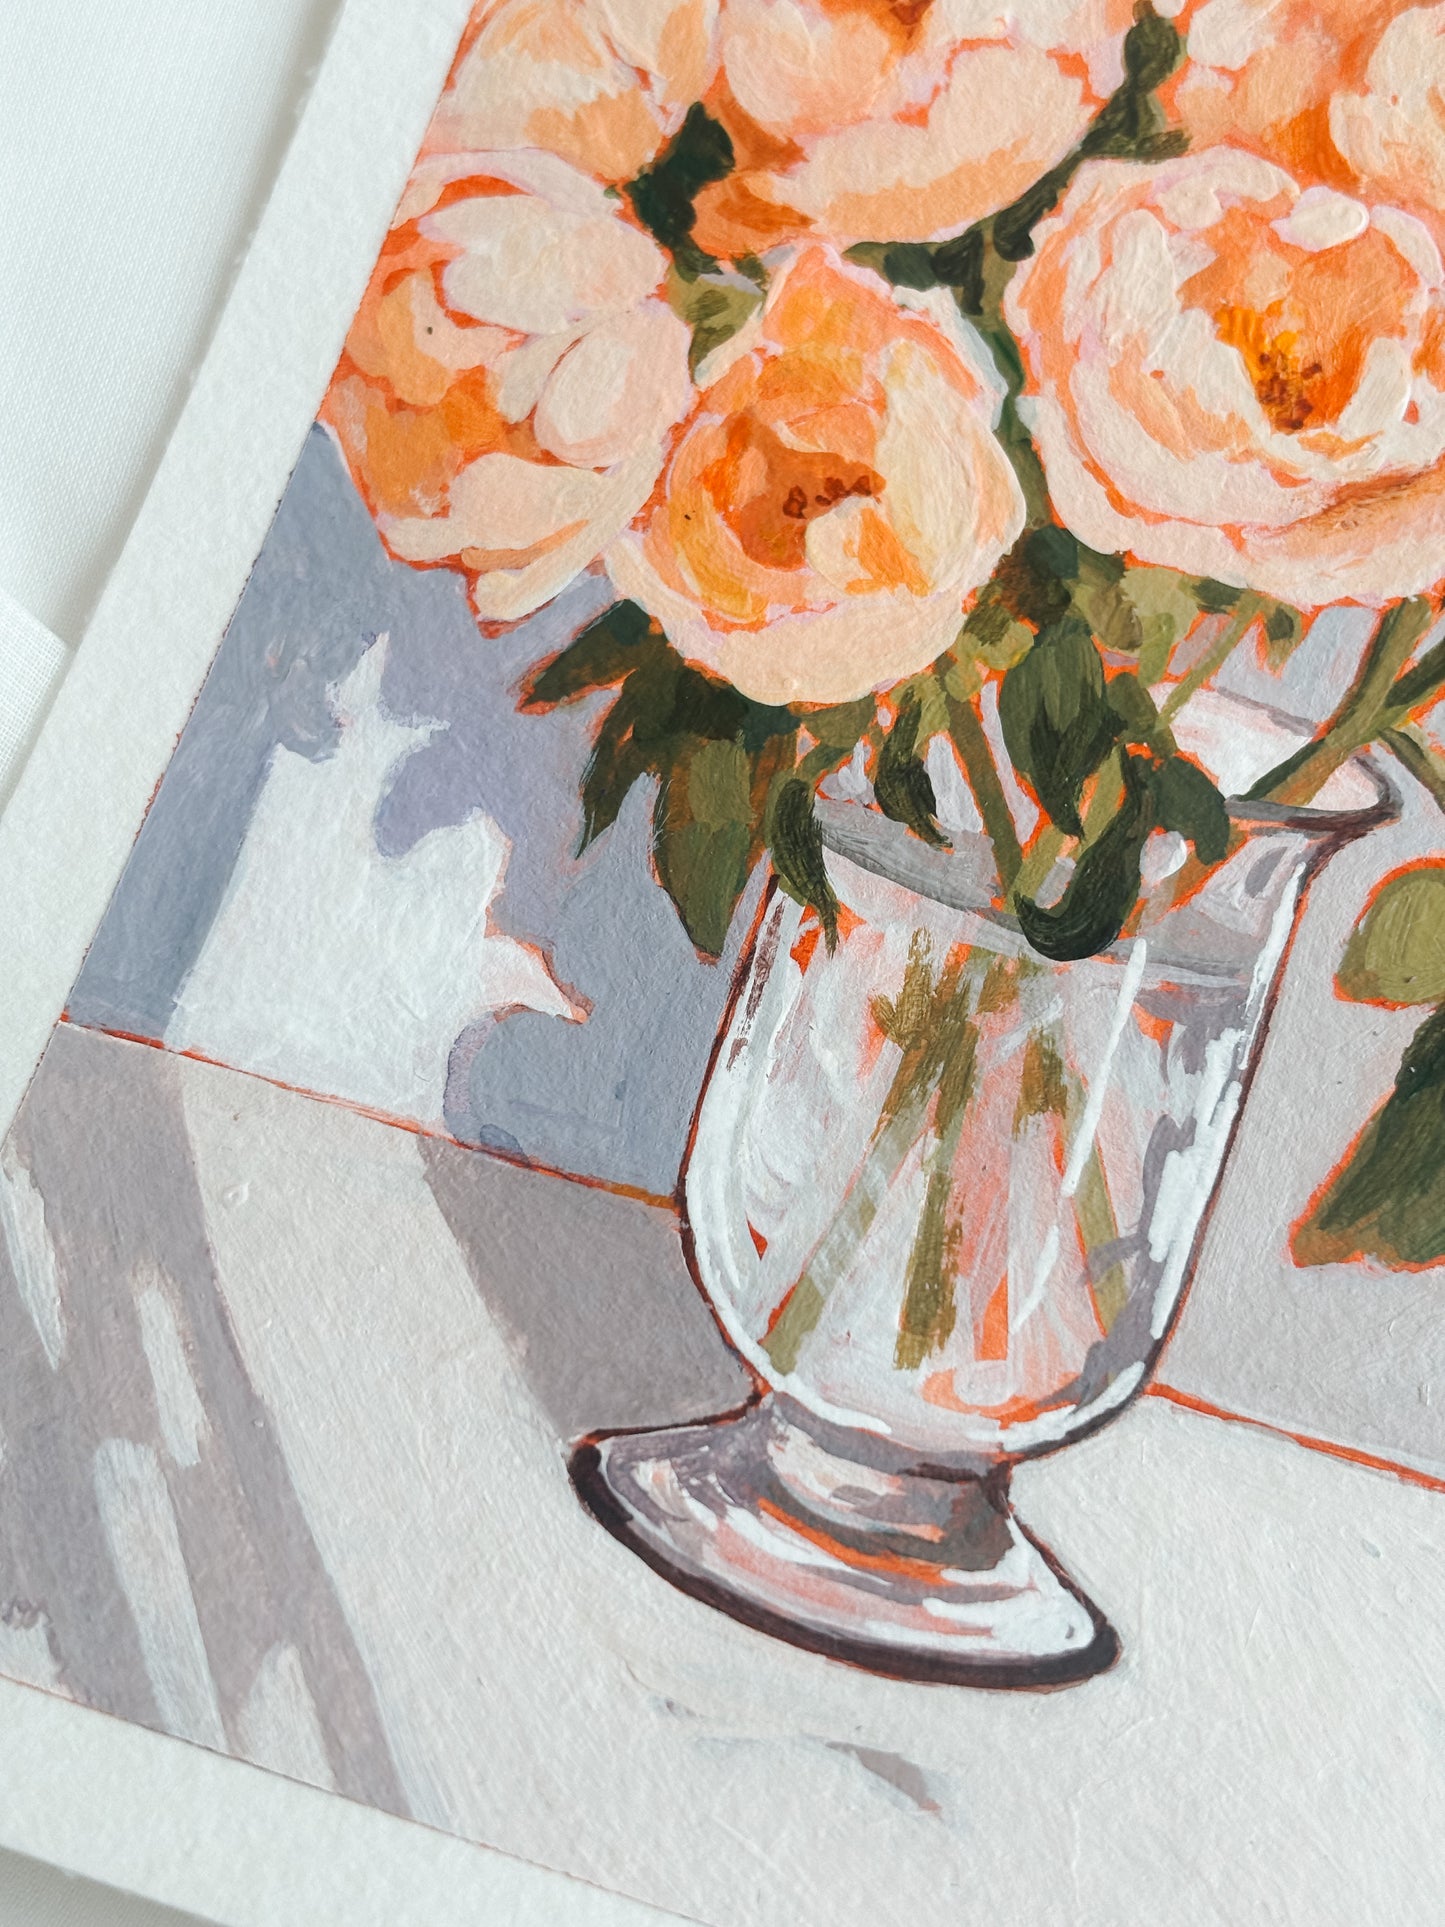 'The Delicate Peonies' 4x6 inch original painting